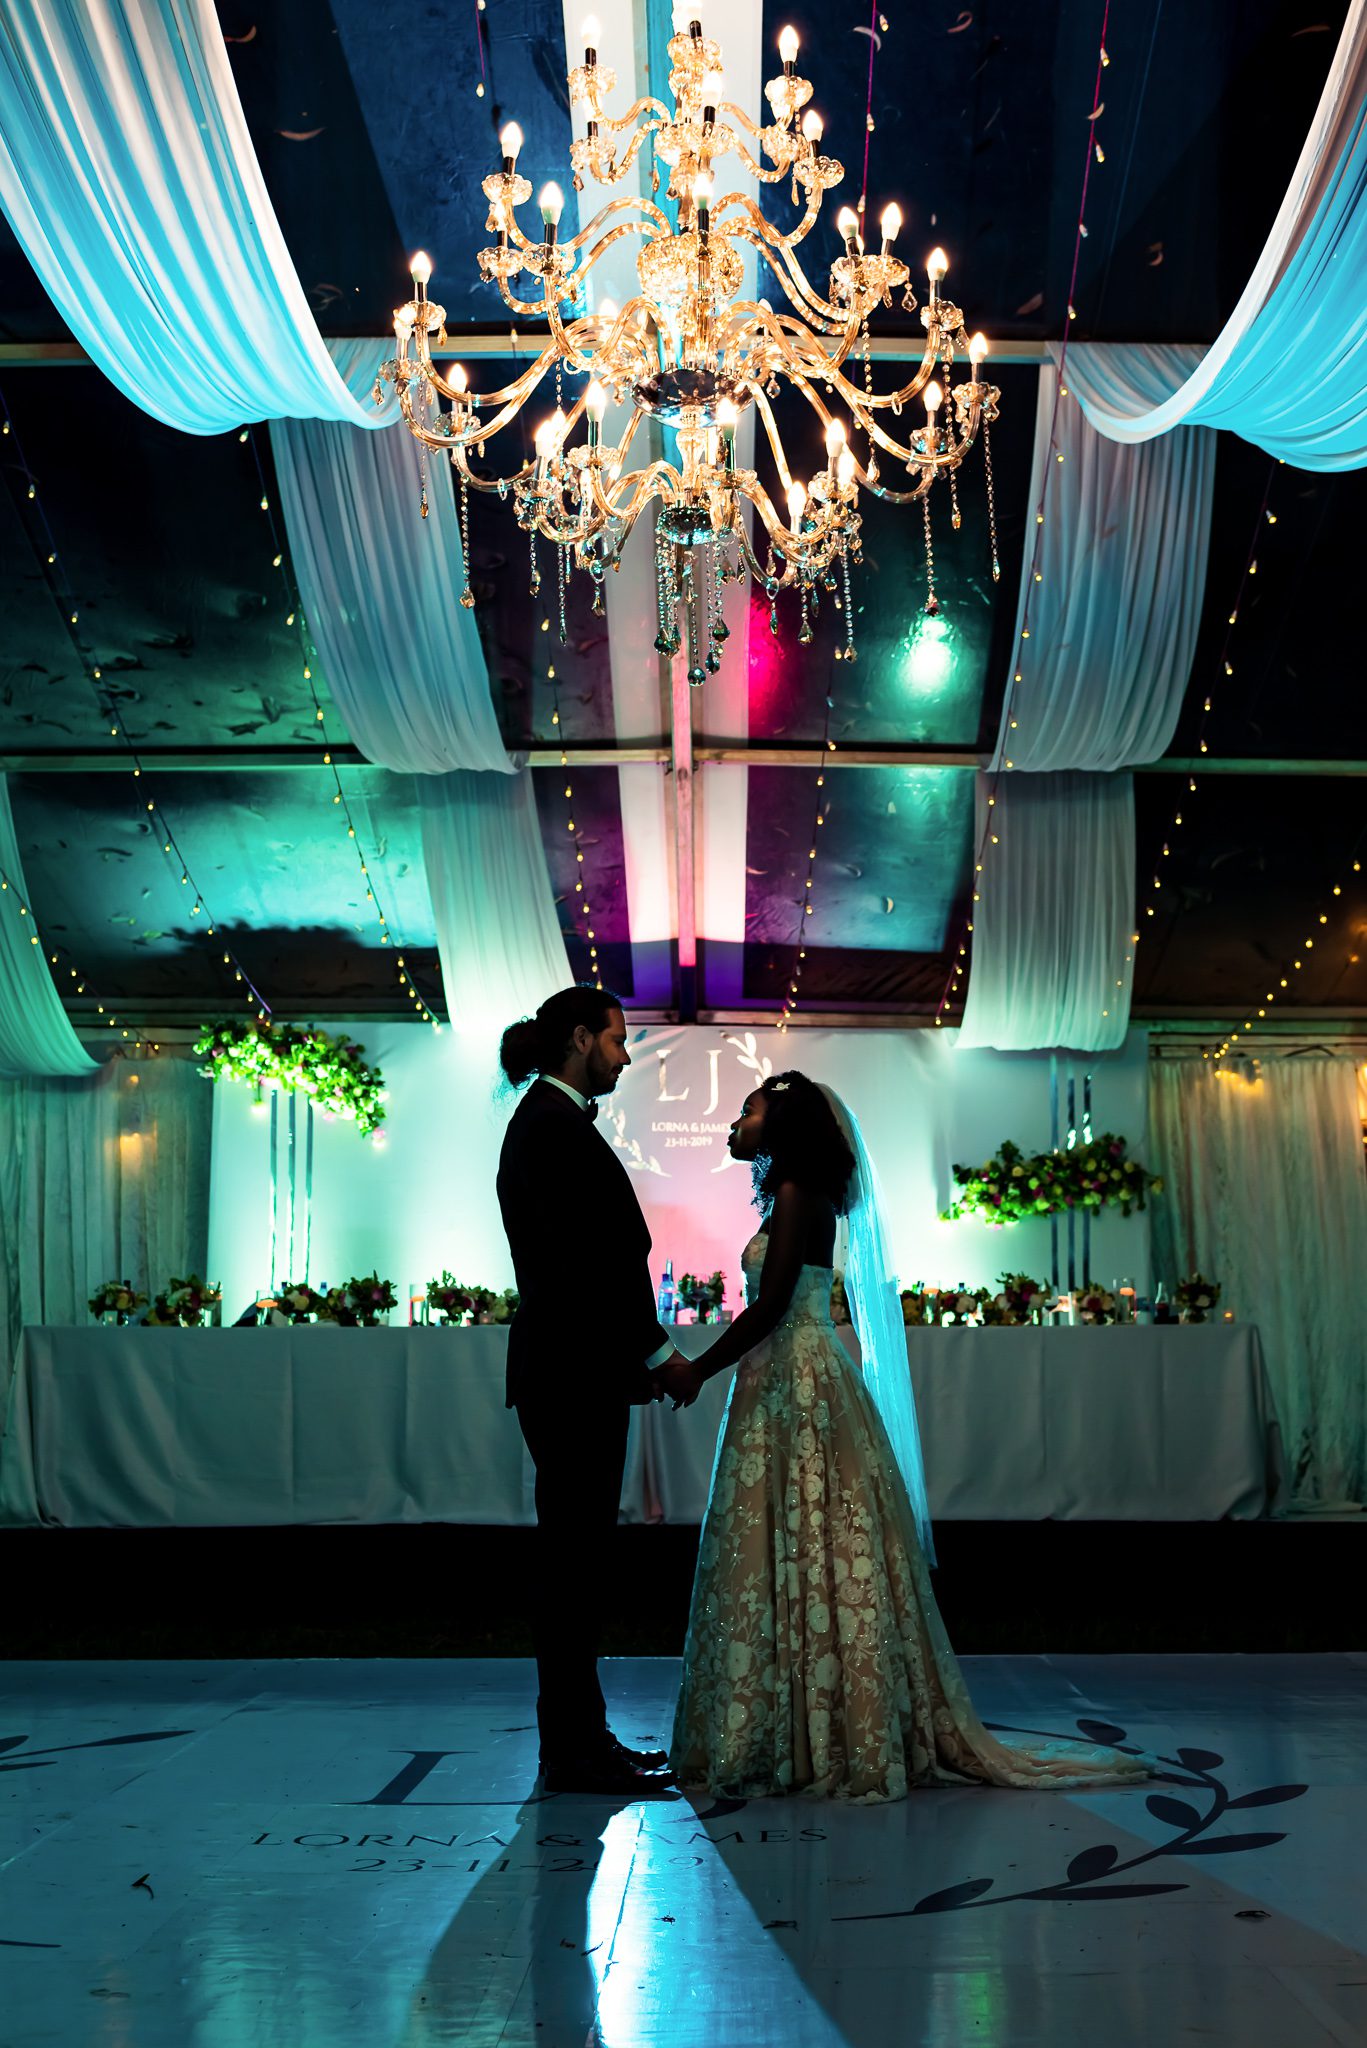 two figures in silhouette hold hands and face each other. one is in a wedding dress and the other in a tux. they stand below a beautiful chandelier in a room with multicolored lights illuminating the wedding venue background